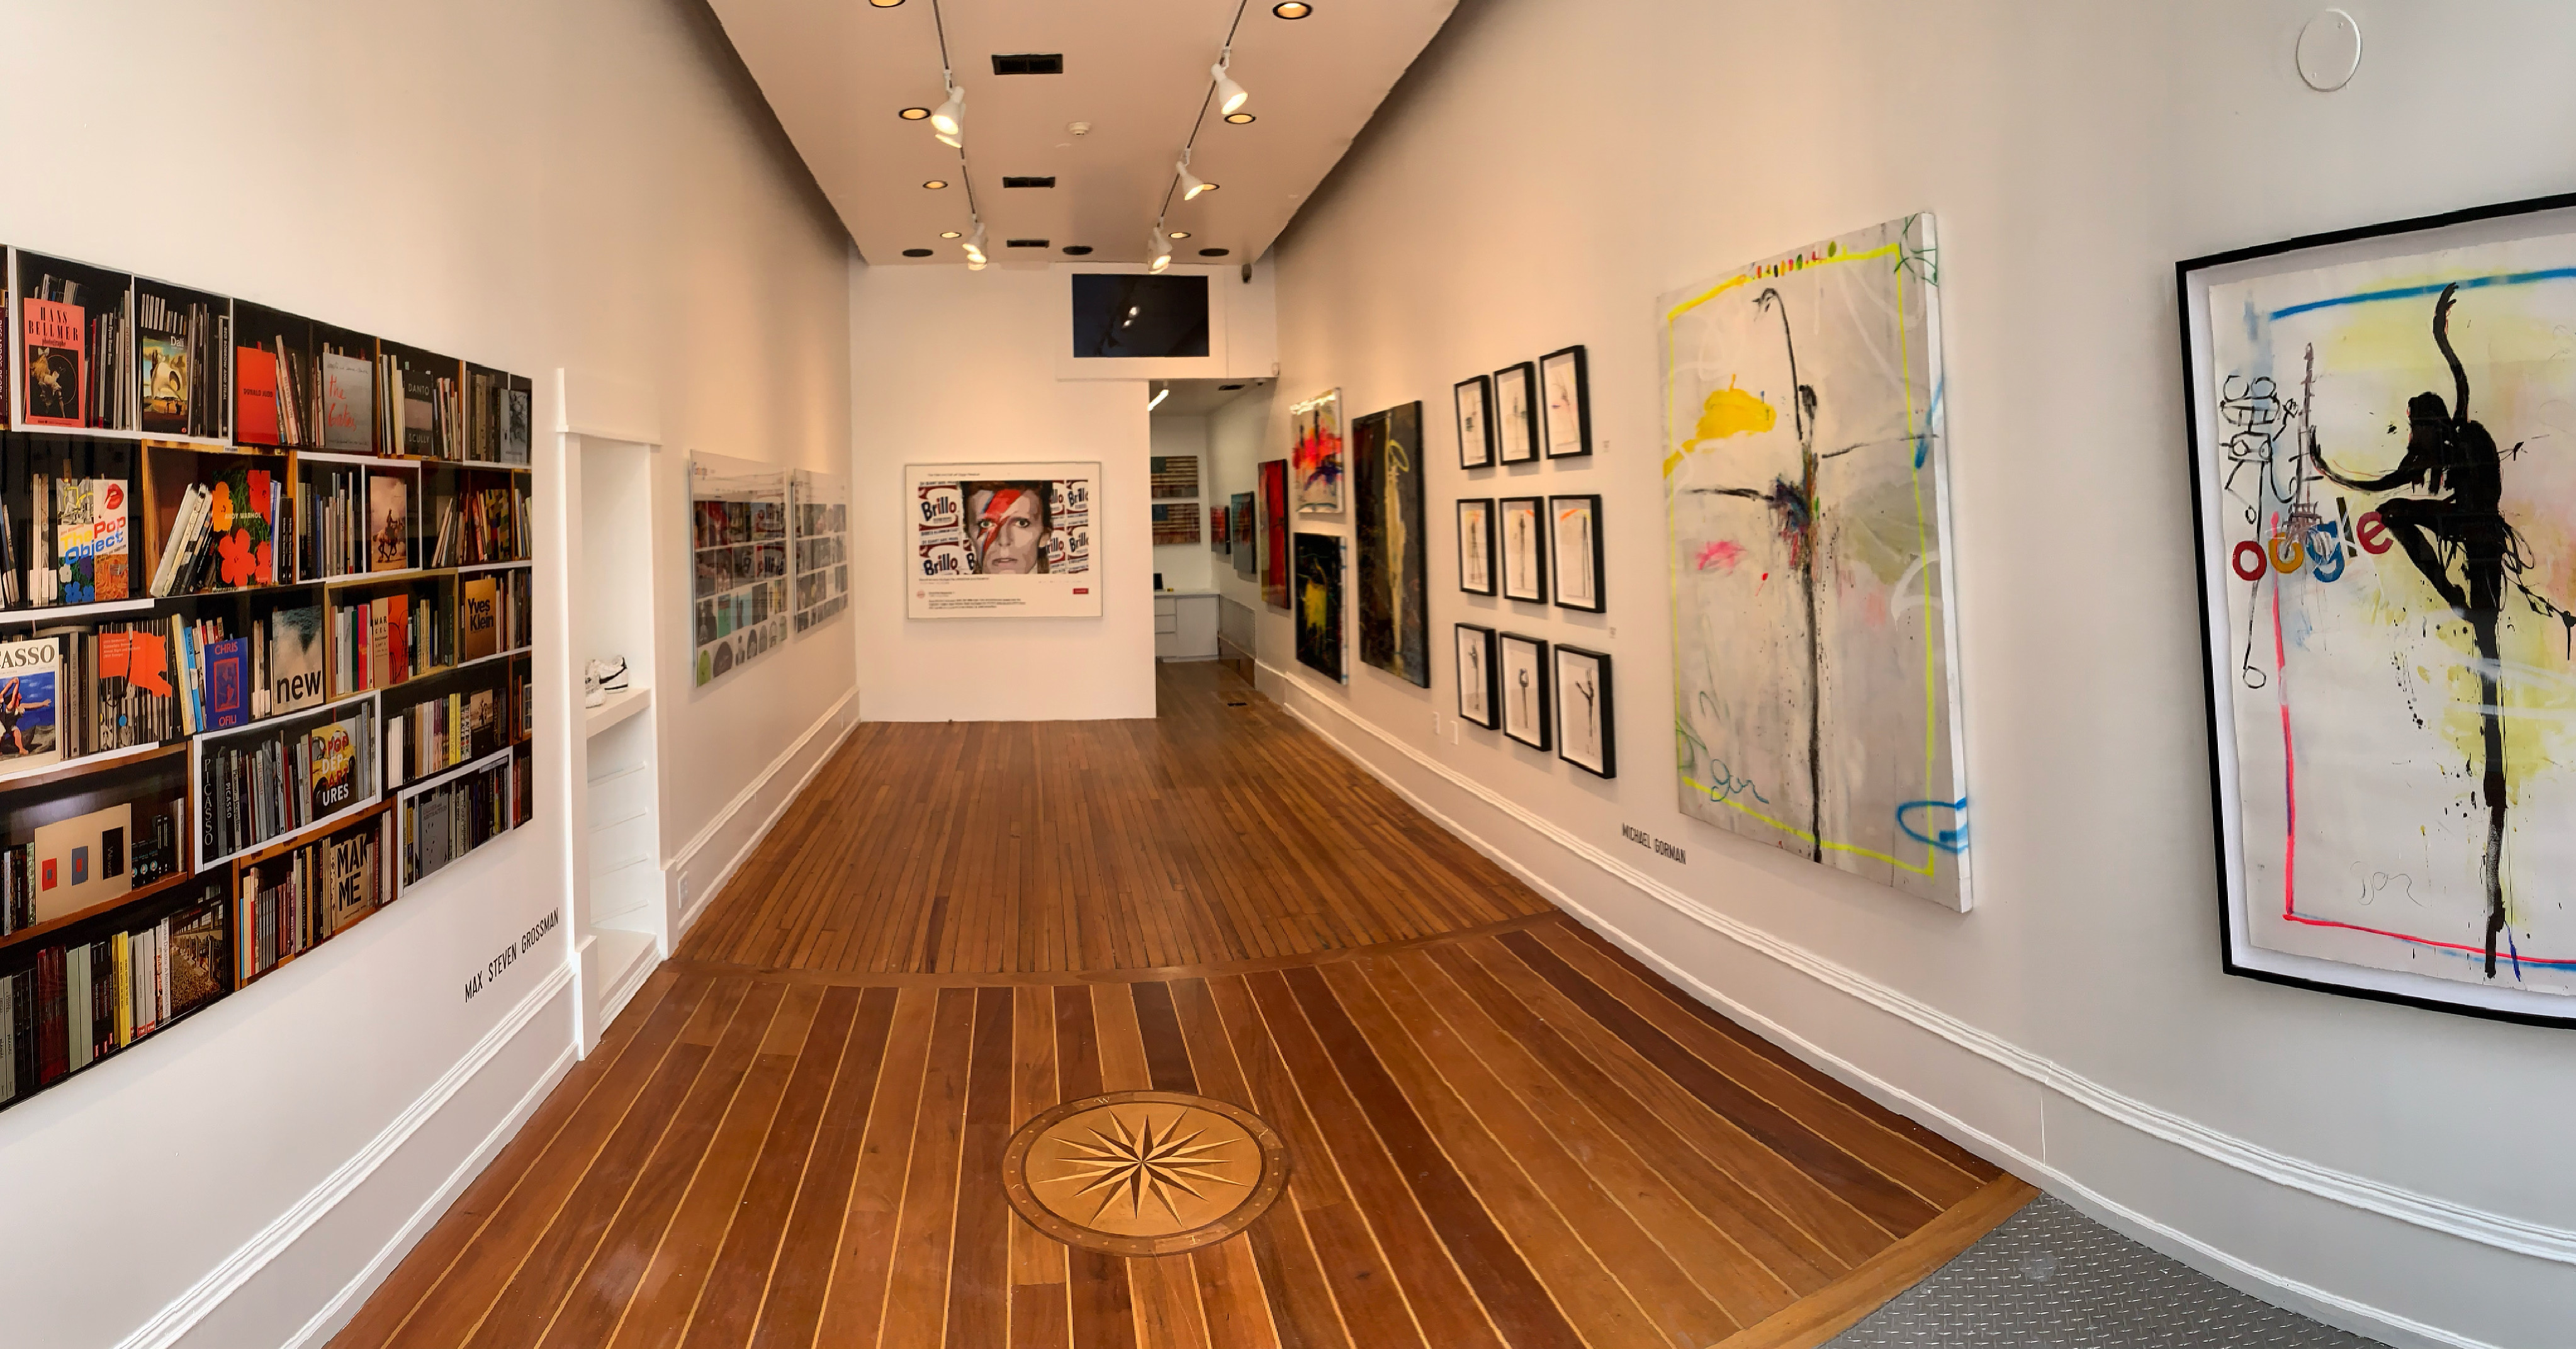 Inside of AXIOM Contemporary art gallery with white walls and artwork on display and a wood floor